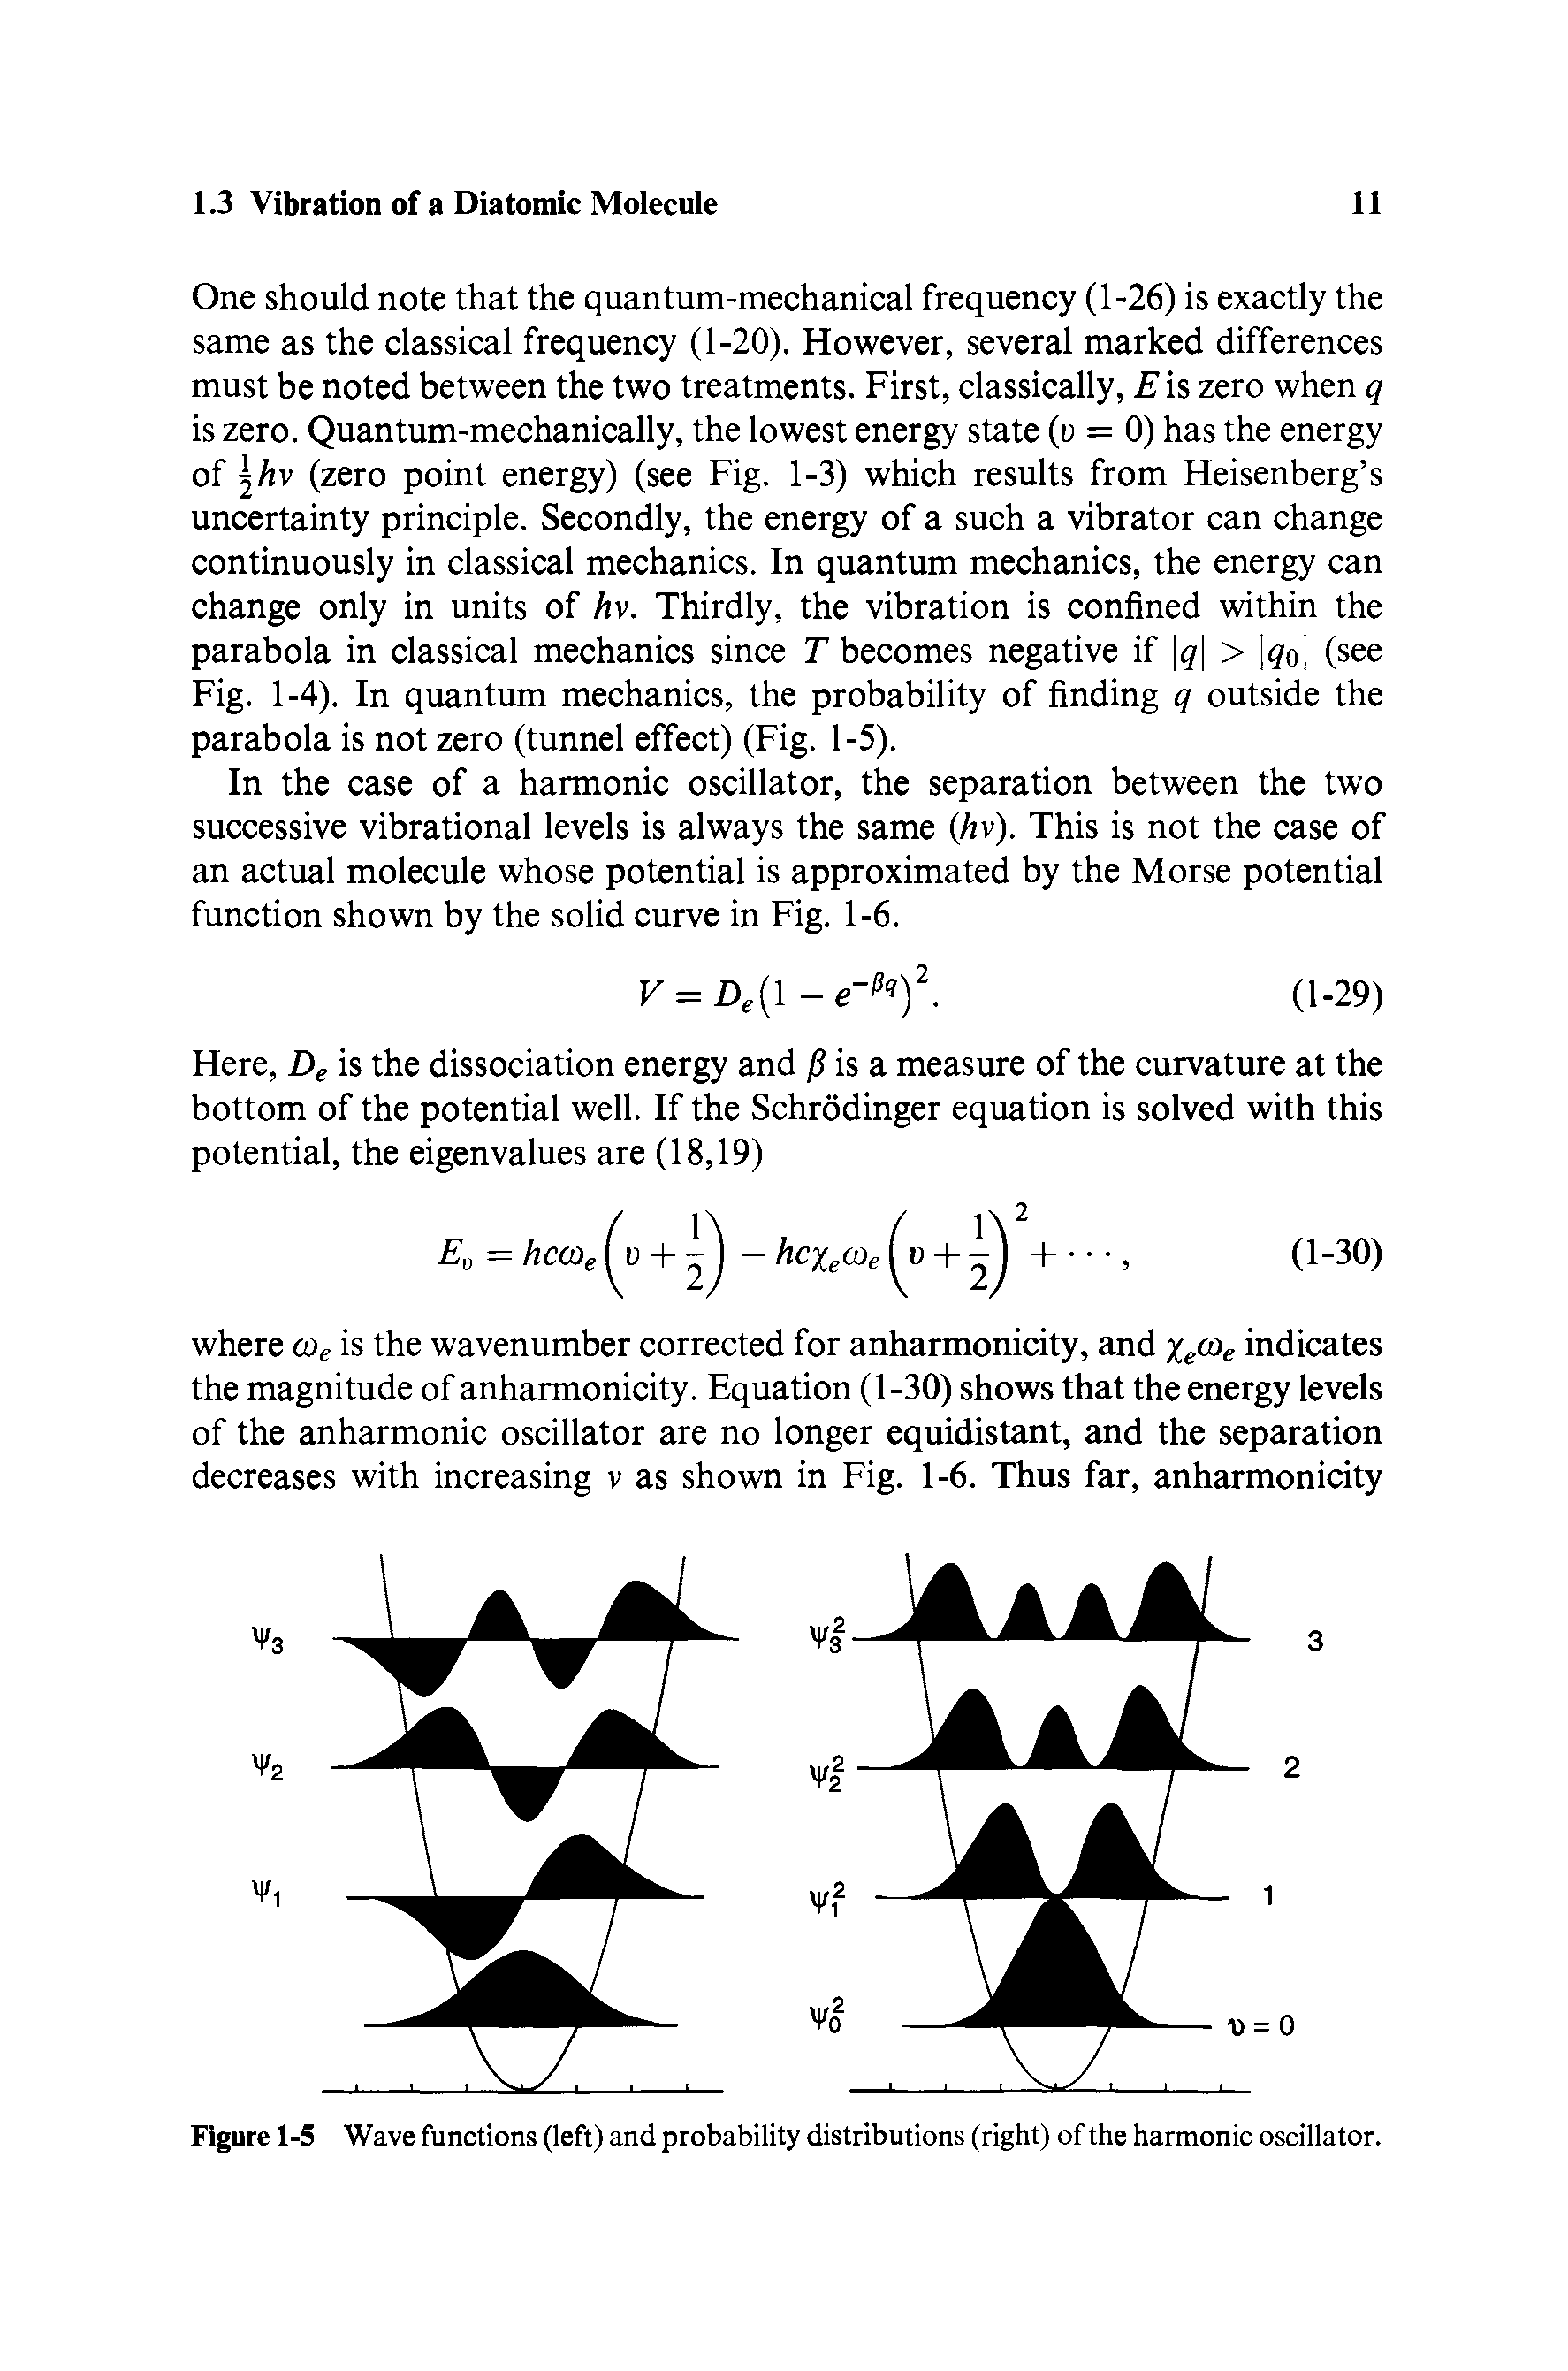 Figure 1-5 Wave functions (left) and probability distributions (right) of the harmonic oscillator.